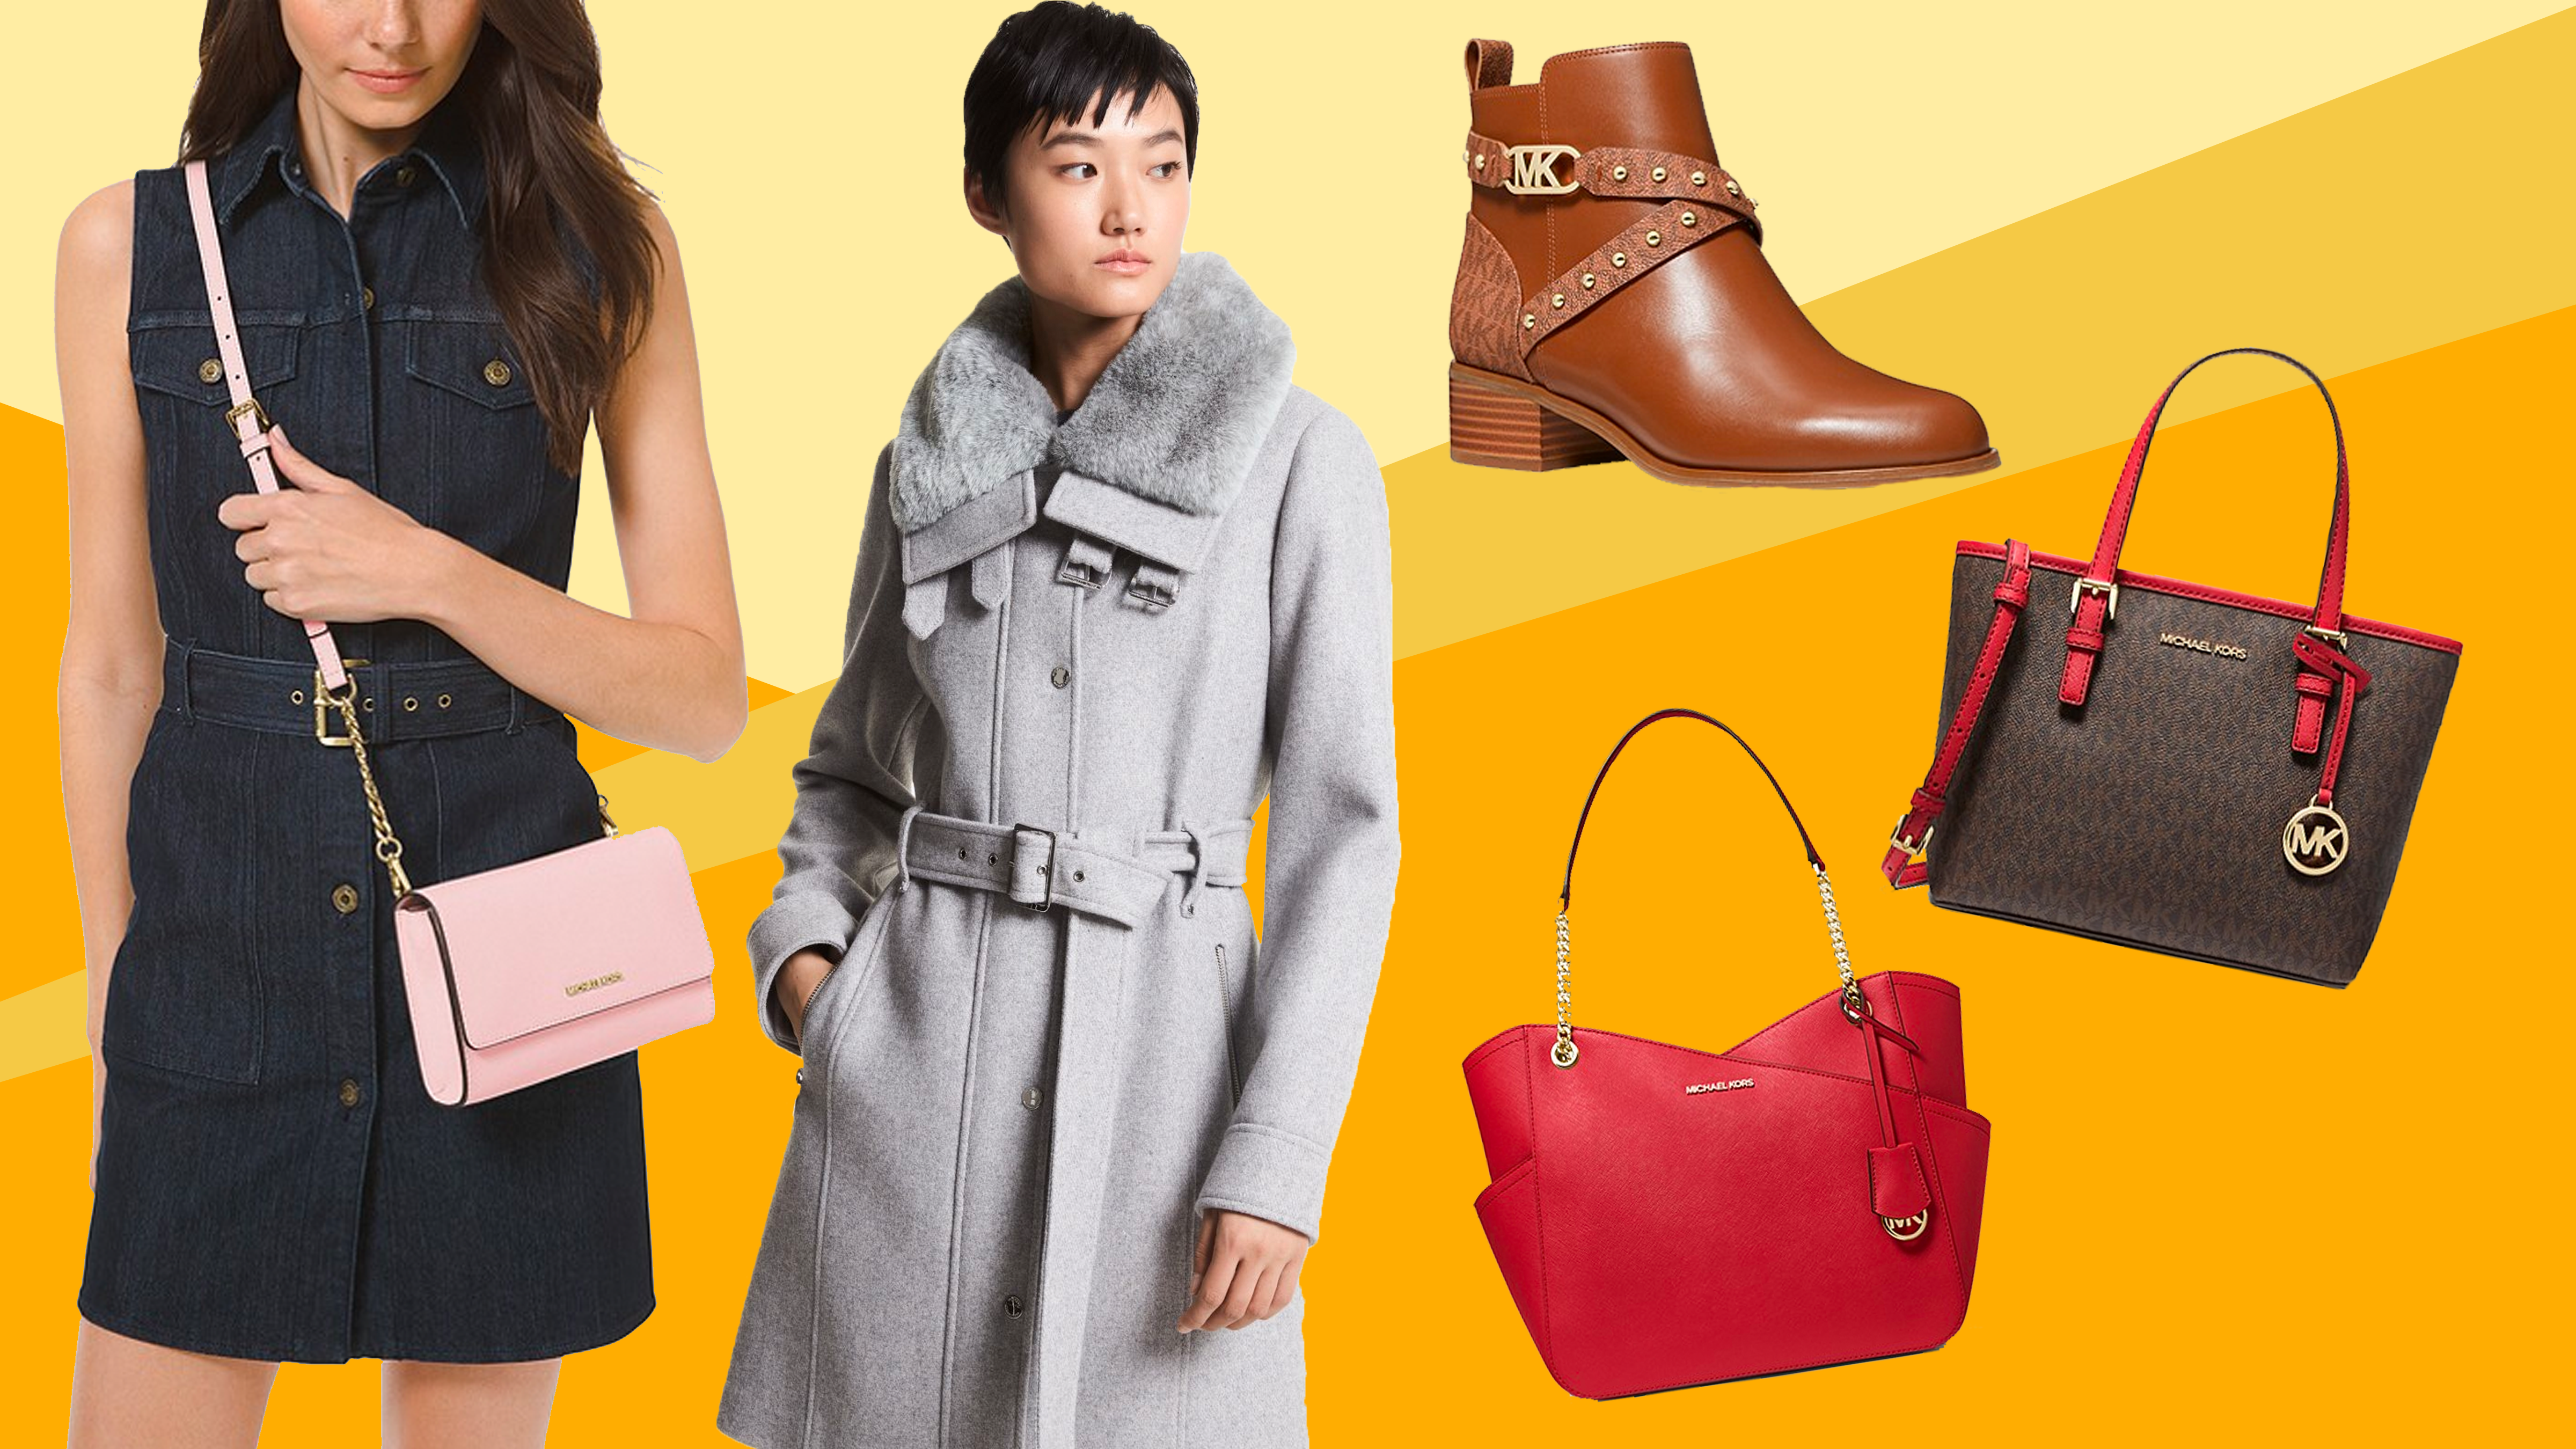 Michael Kors sale: Save an extra 20% on purses, shoes and clothes